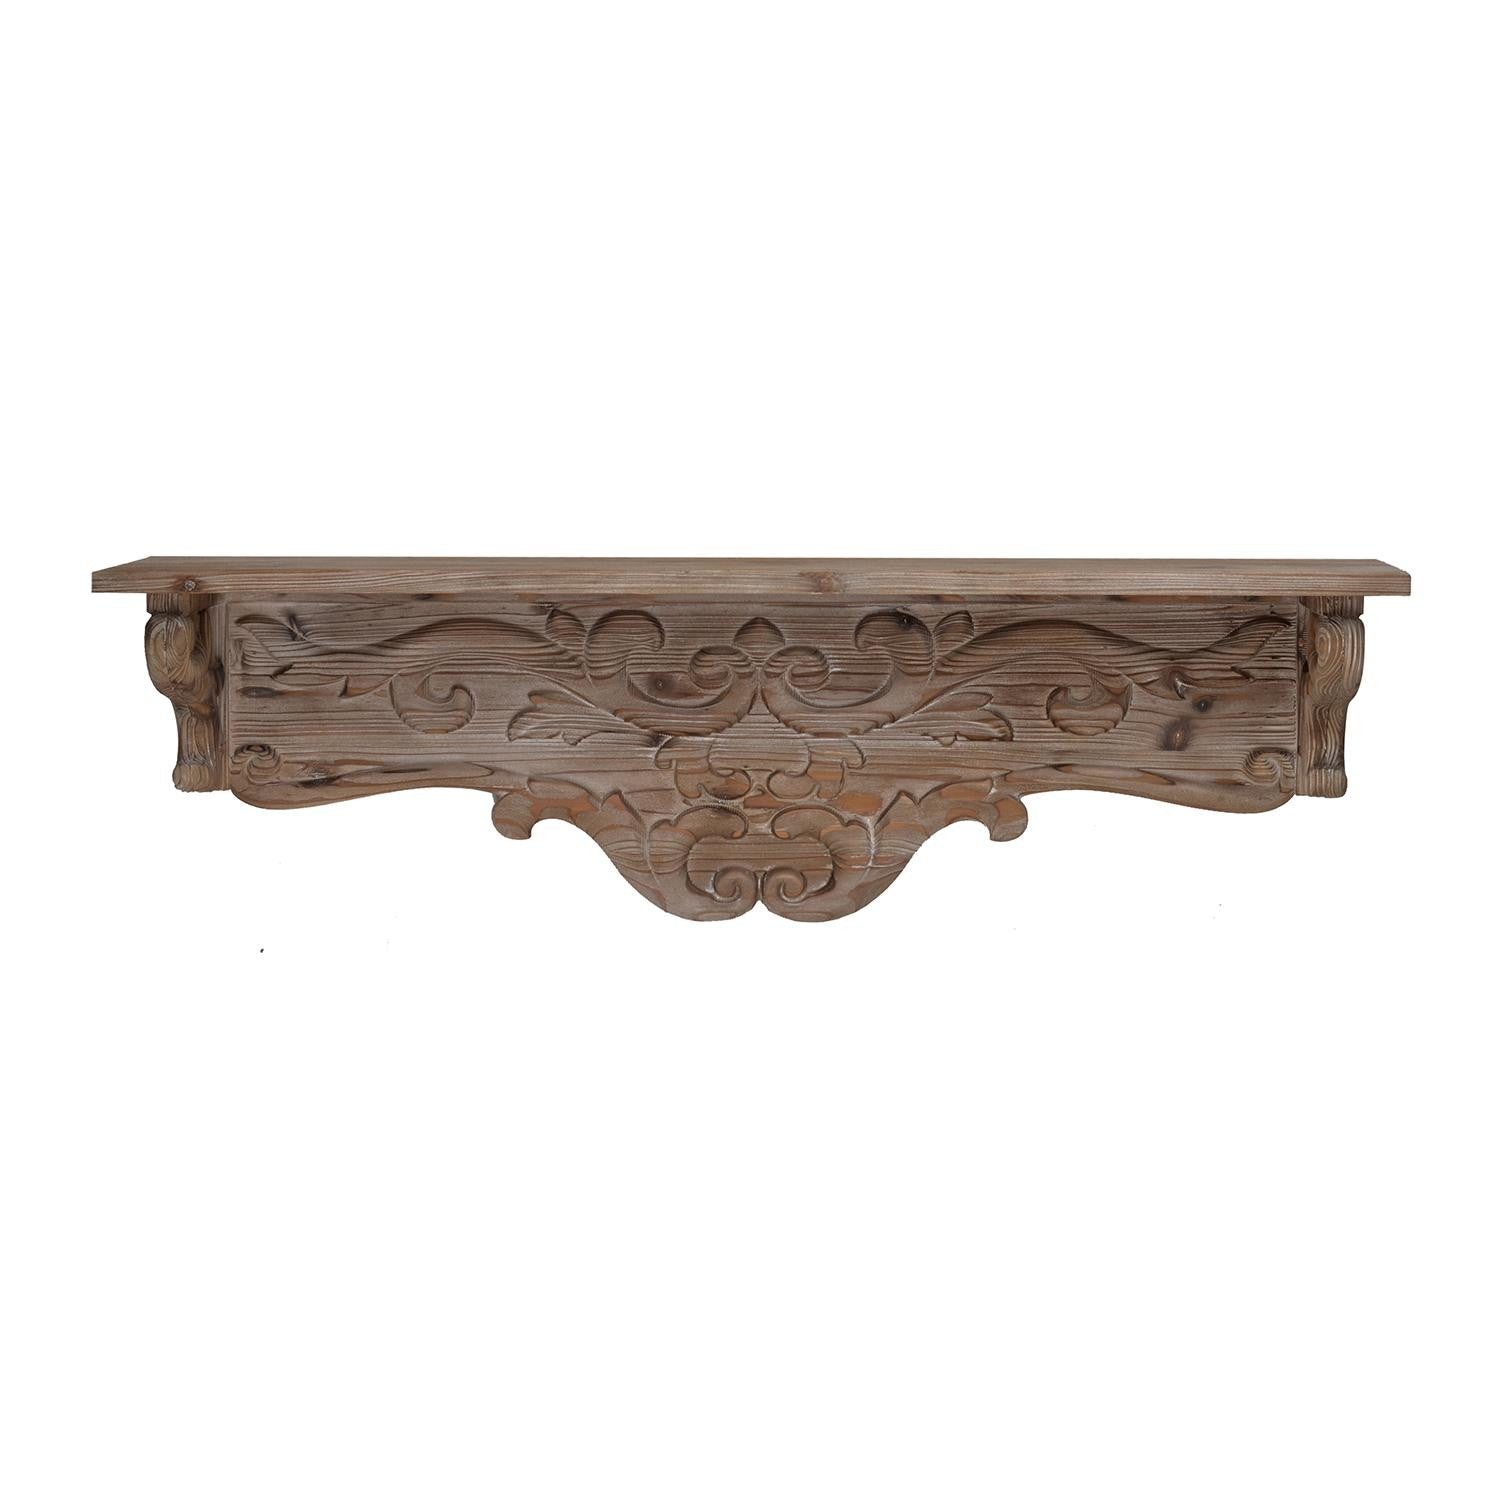 Charming Carved Floral Scroll Wooden Wall Shelf